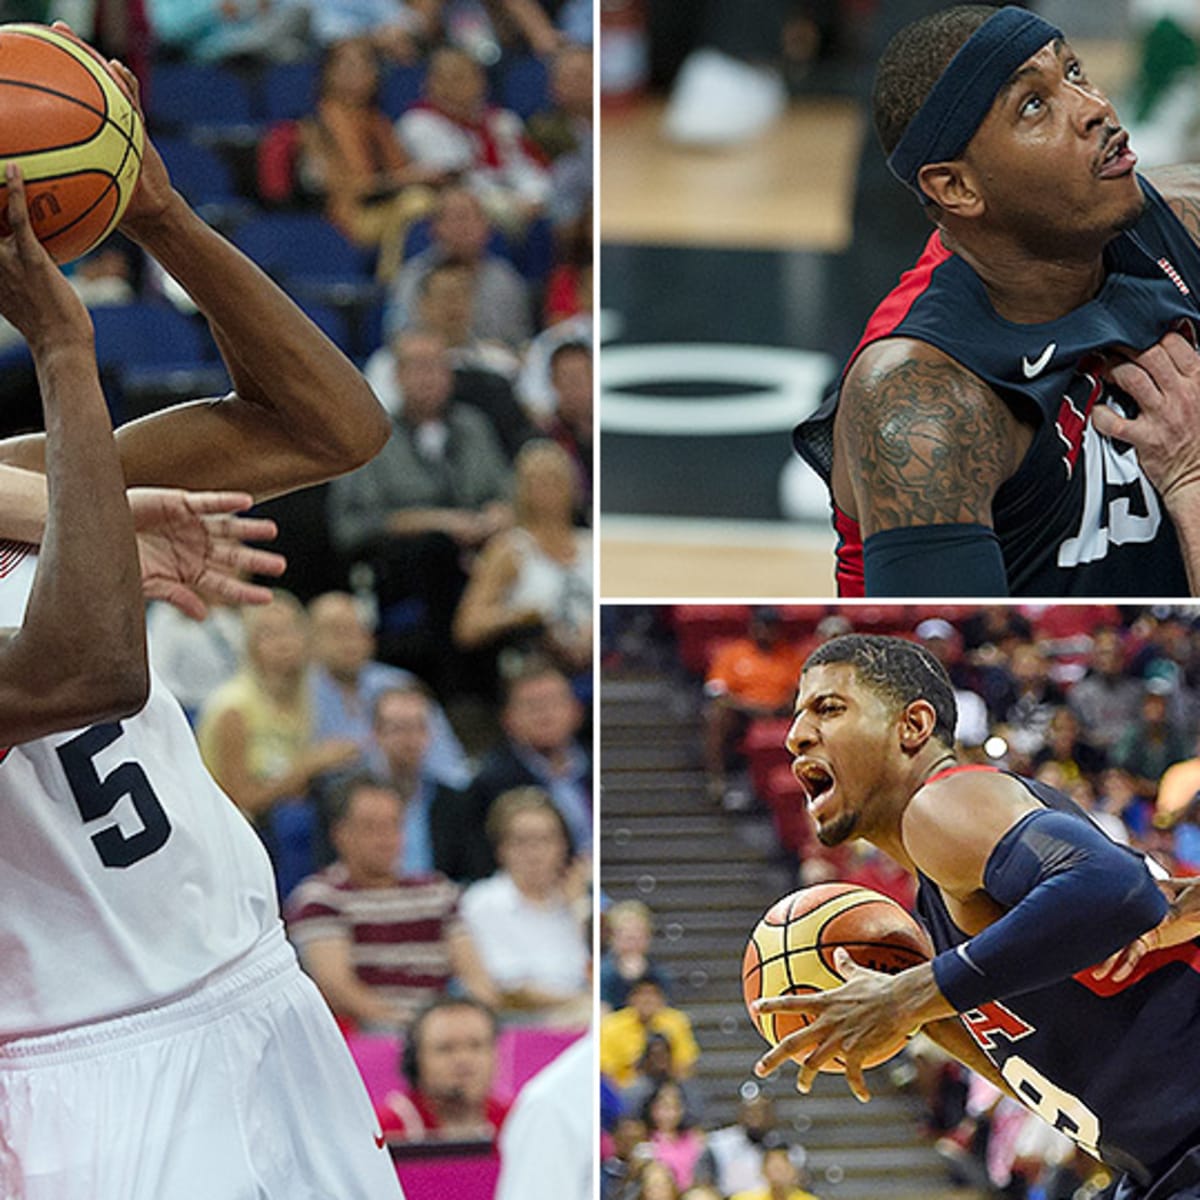 Team USA at Paris Olympics: Steph Curry, Chris Paul may make roster